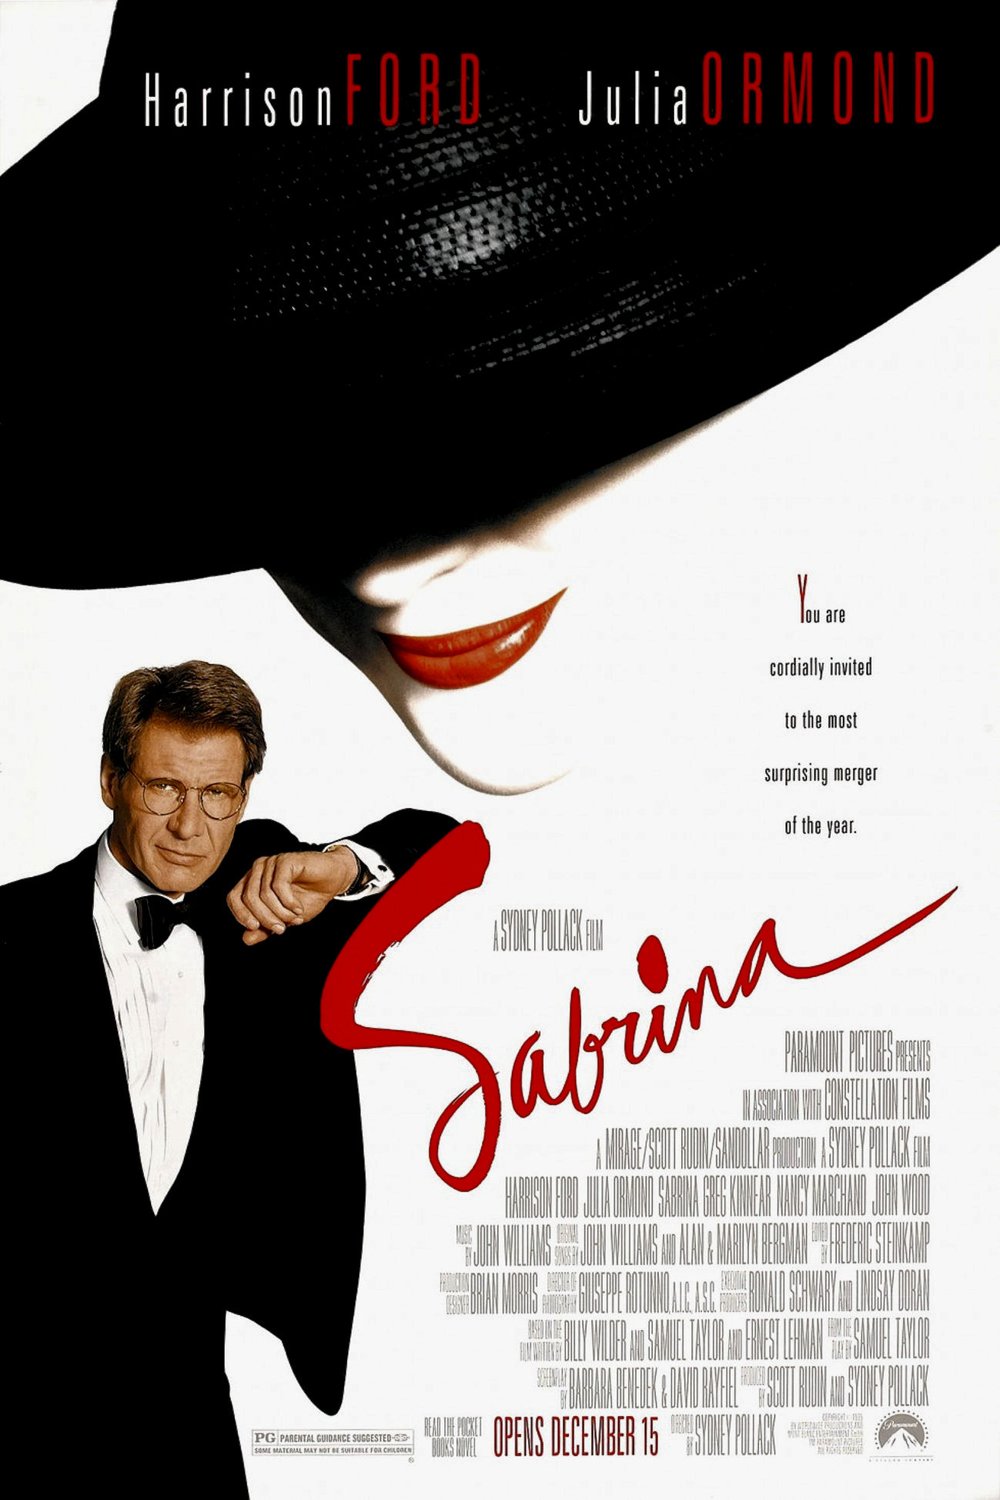 Poster of the movie Sabrina